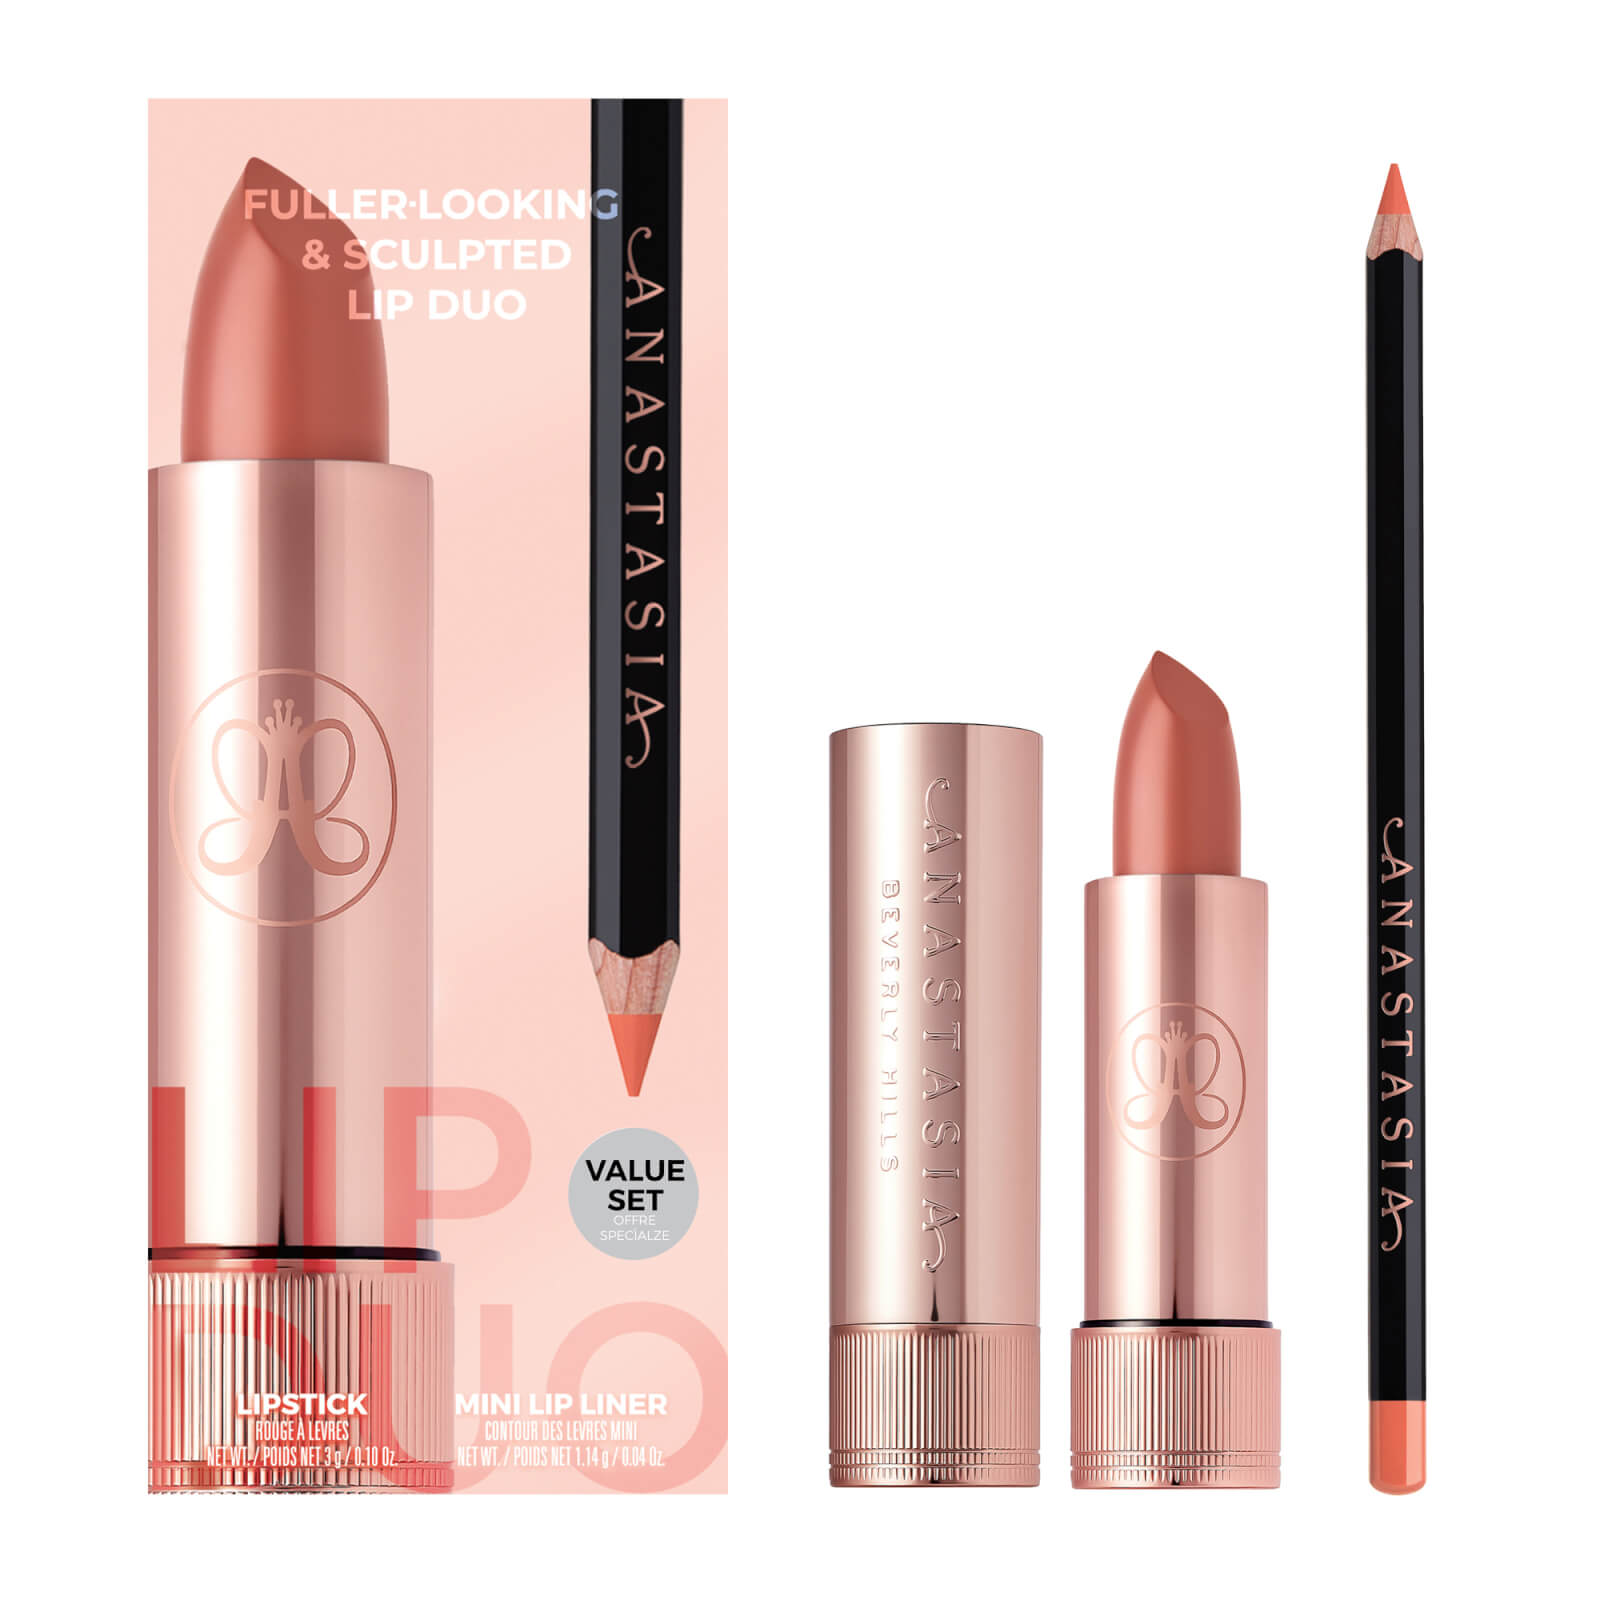 Anastasia Beverly Hills Fuller Looking and Sculpted Lip Duo Kit (Various Shades) - Peach Bud Satin Lipstick & Sun Baked Lip Liner